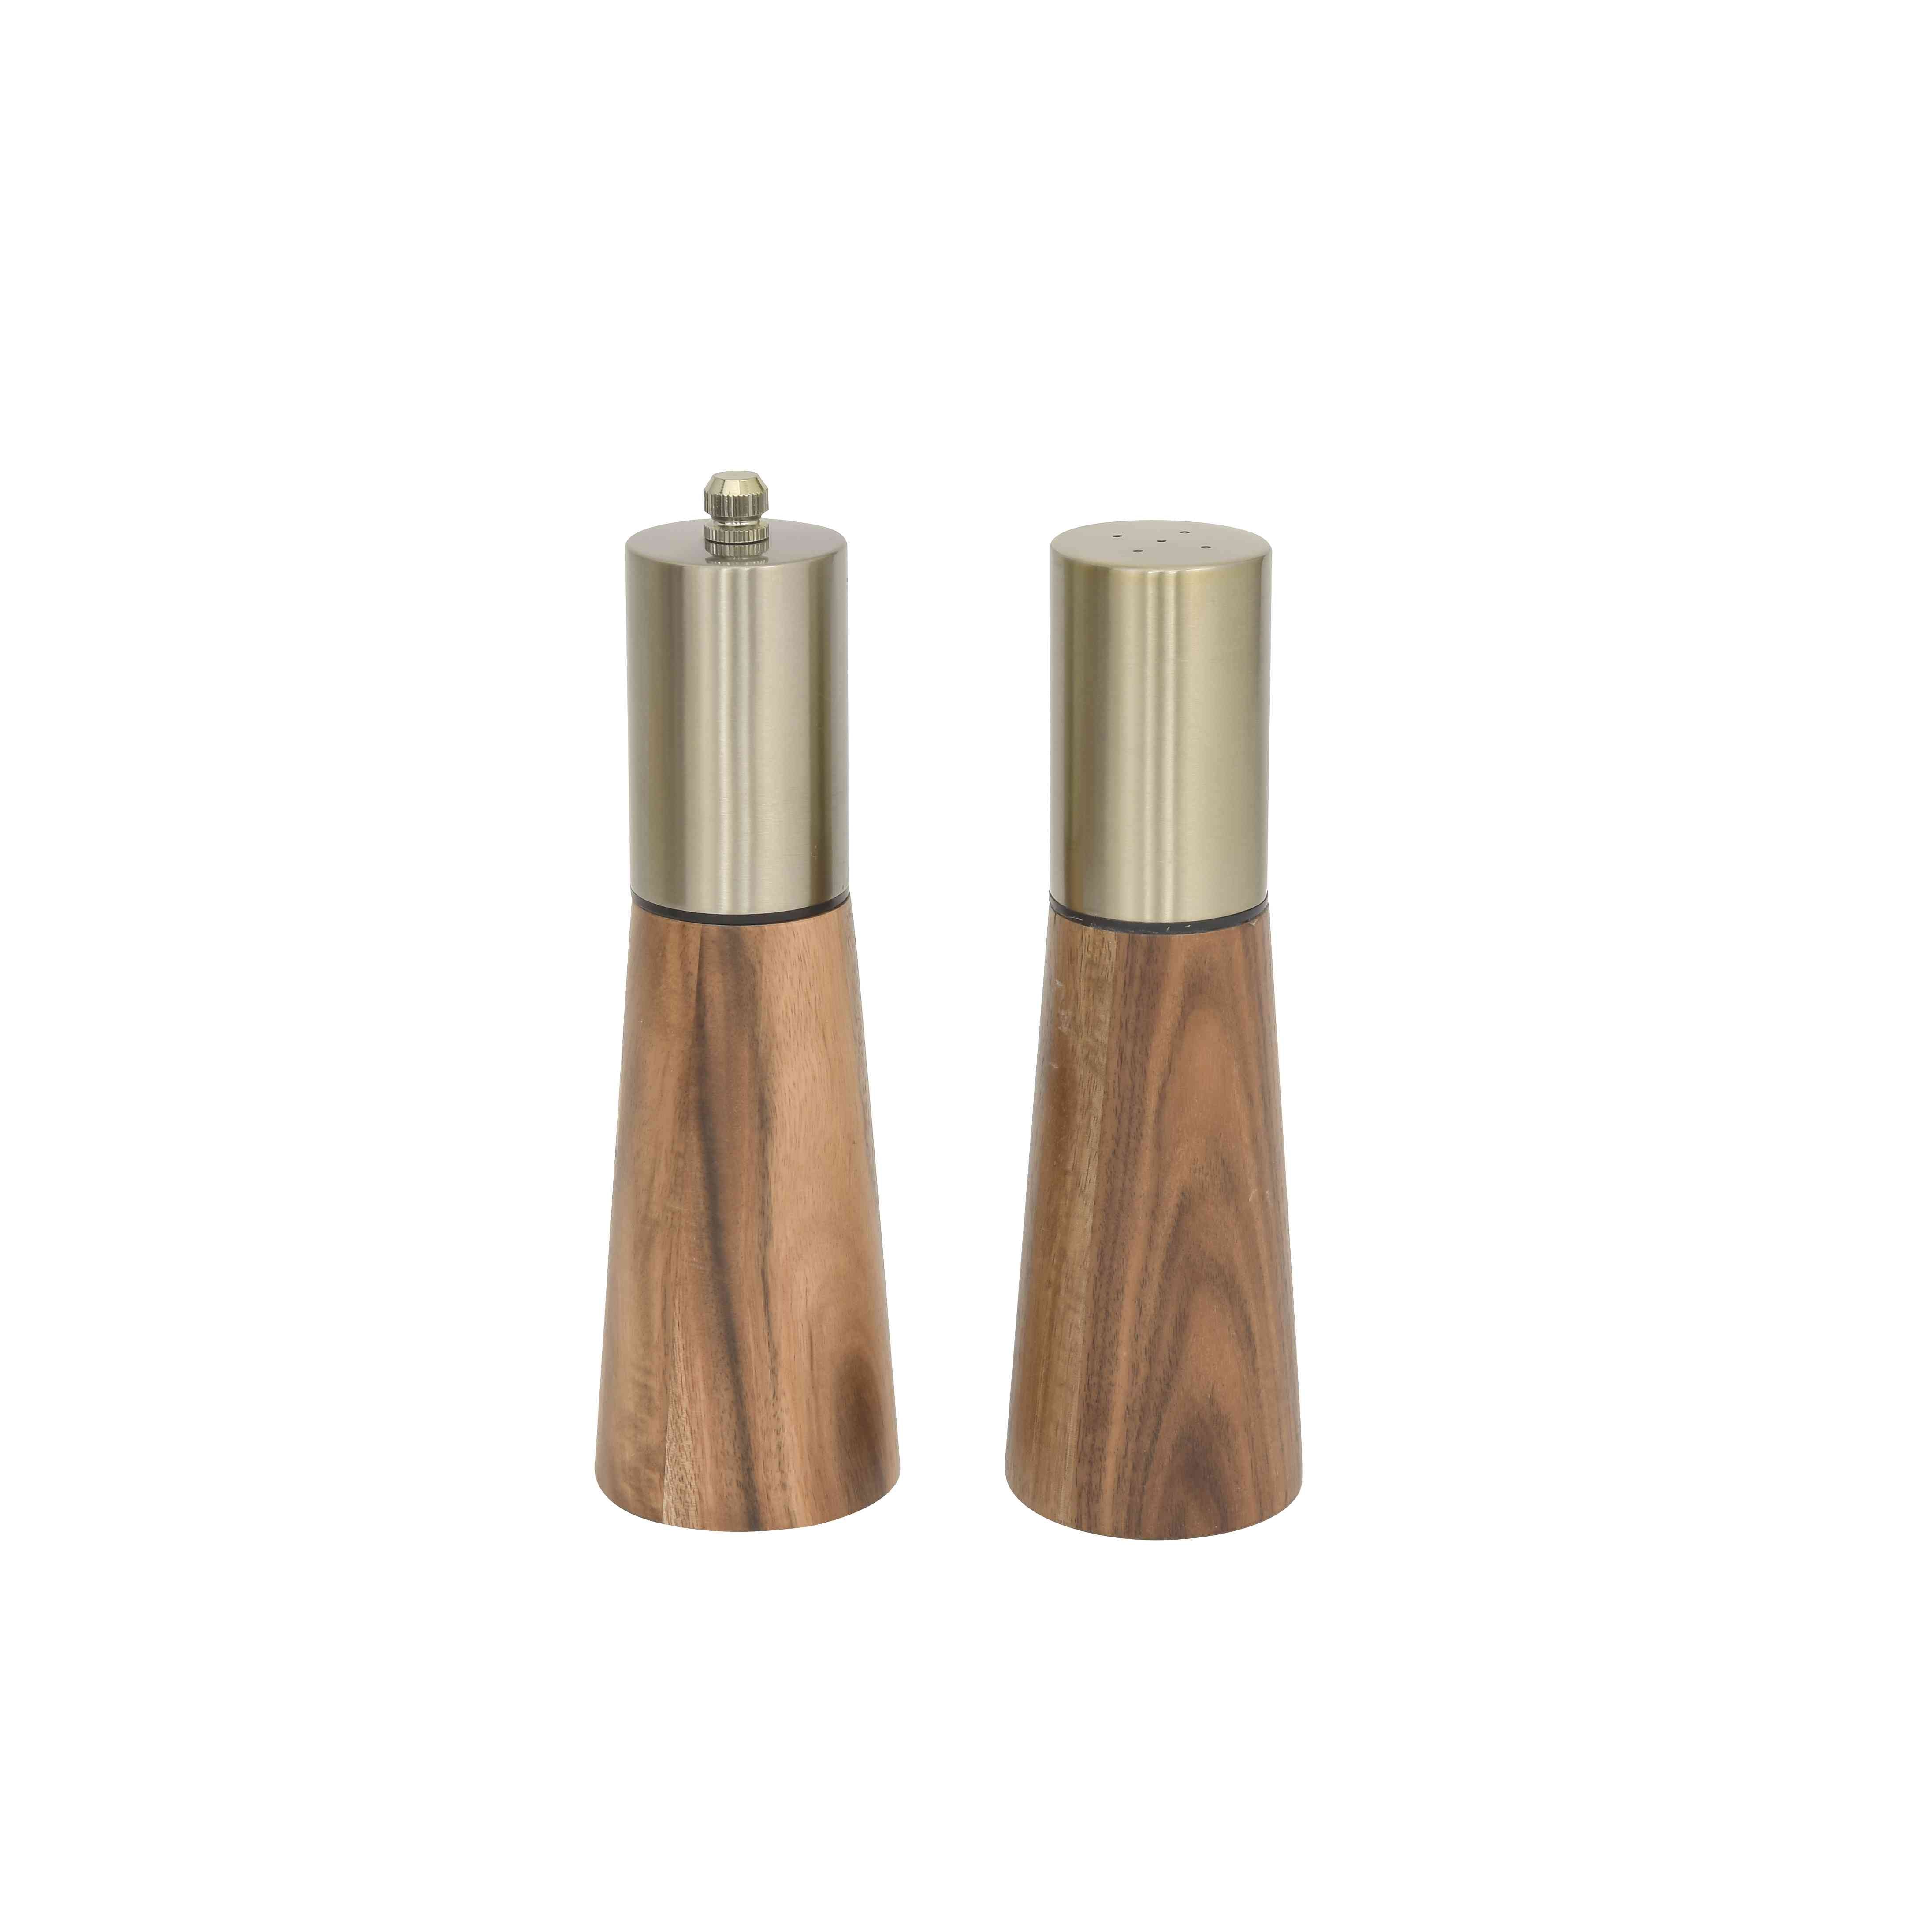 Acacia Wood Refillable Pepper Mill Grinder for Kitchen / Restaurant (Set of 2)